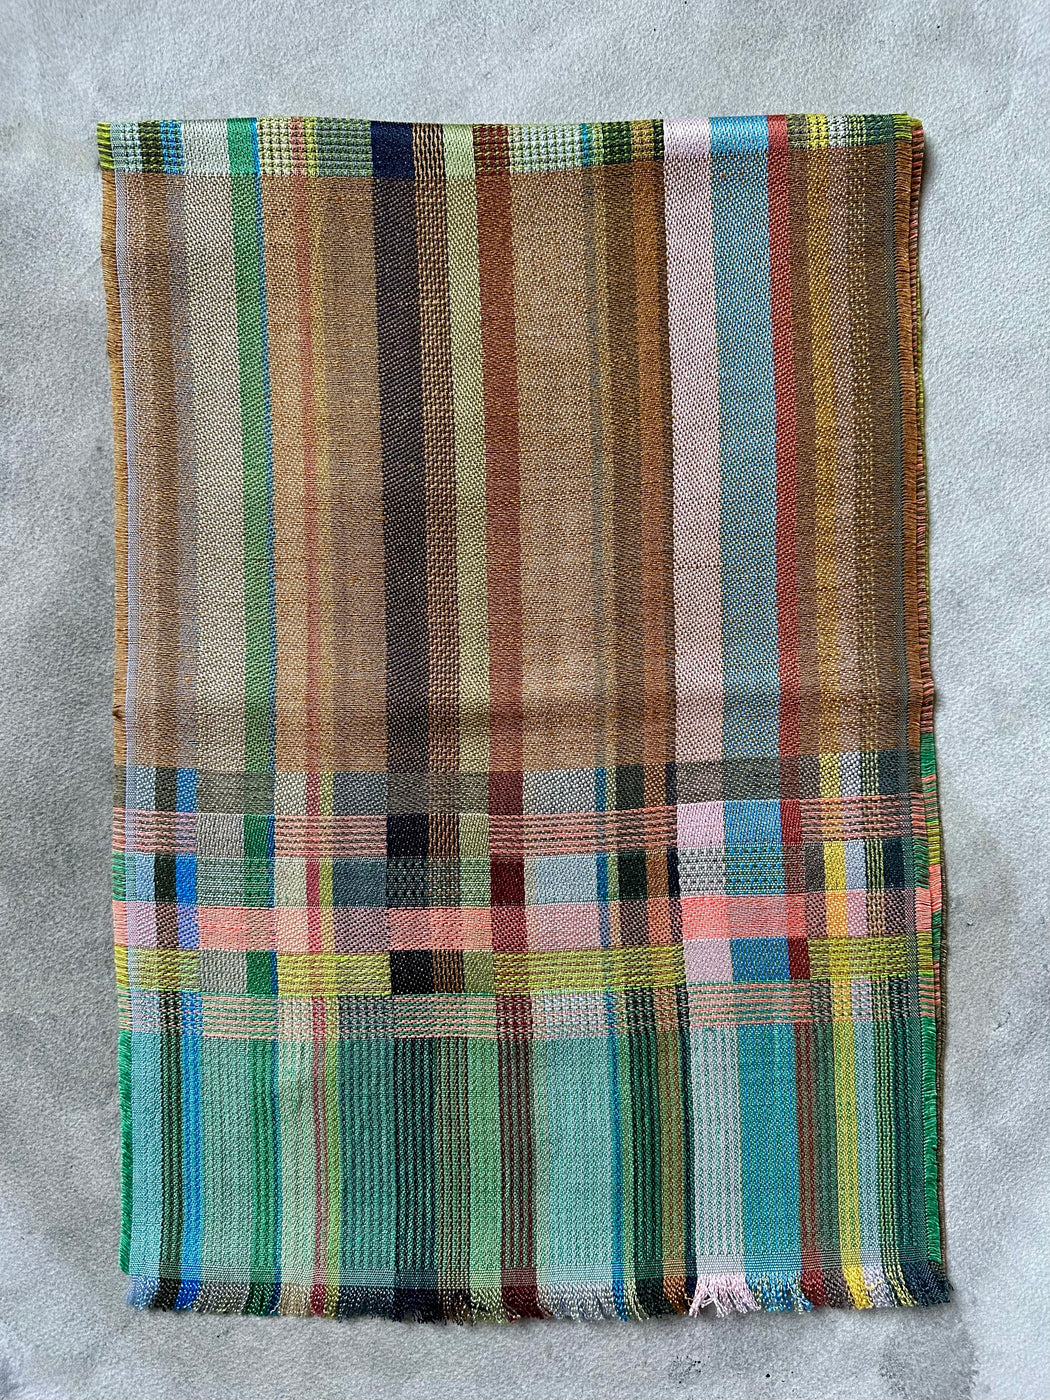 Wallace Sewell "Aldine" Silk and Linen Scarf - Orchard